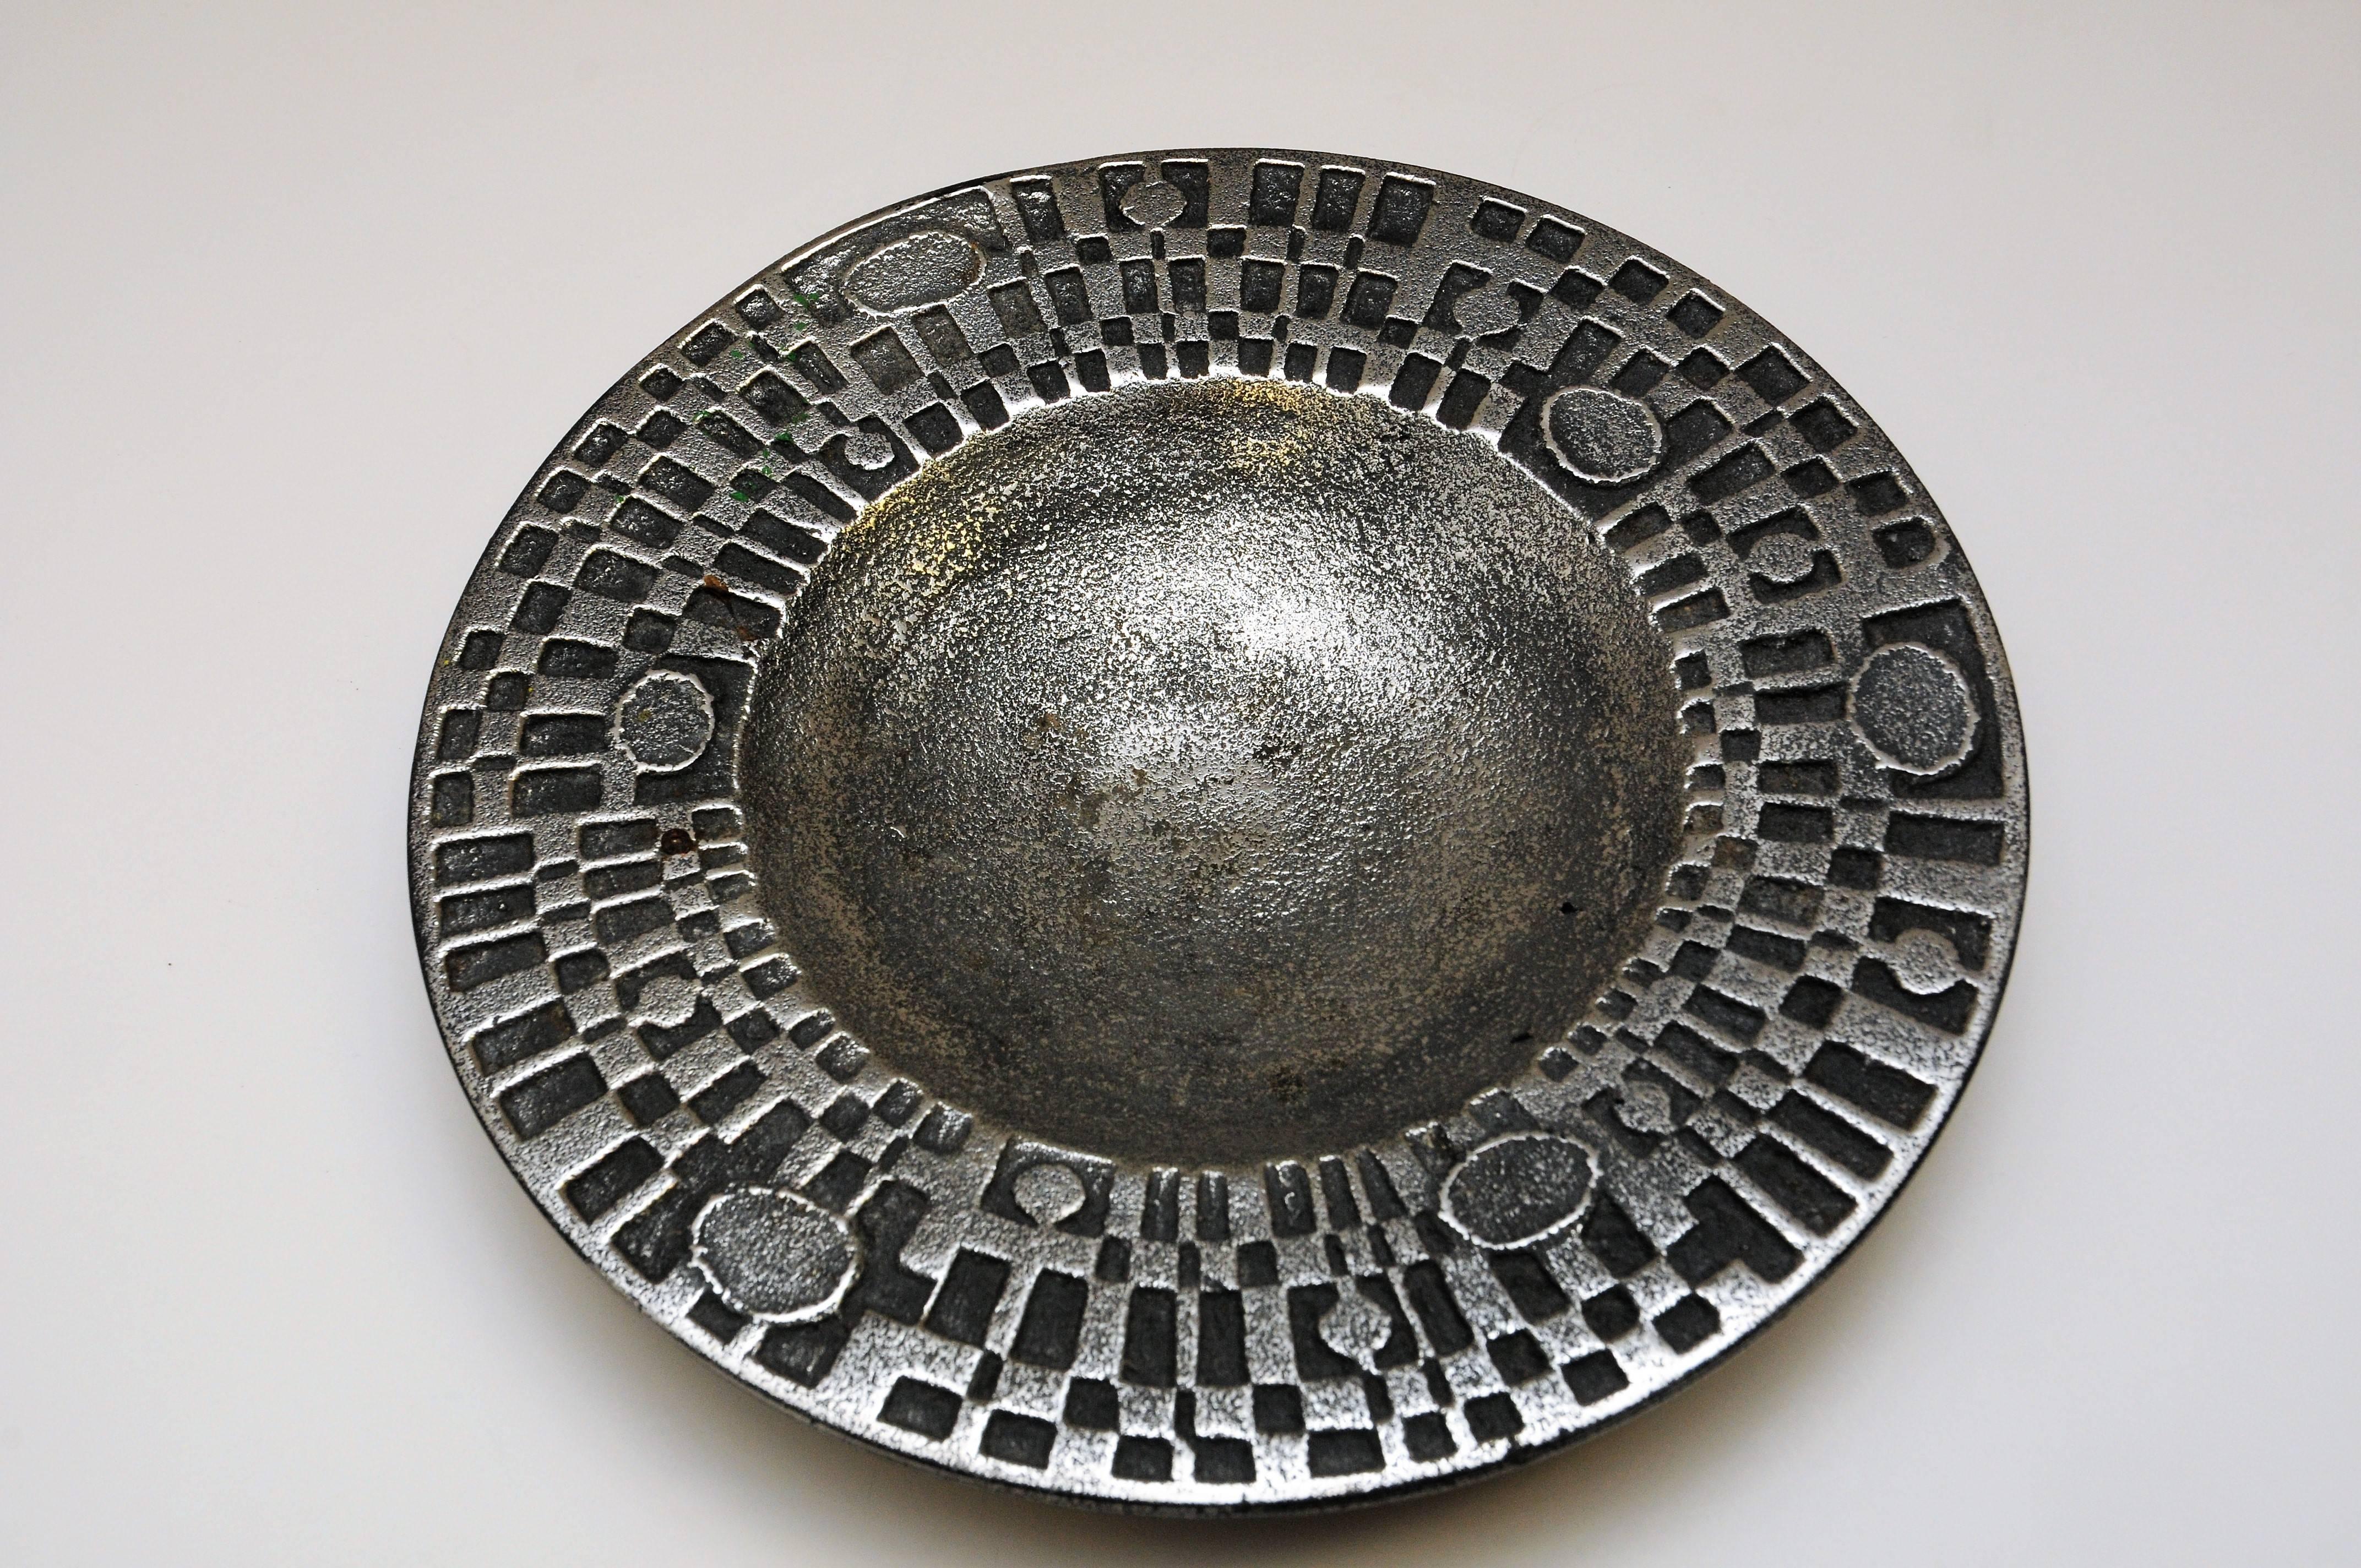 A stainless steel dish designed by Olav Joa (born 1942) for Polaris, Sandnes from the 1970s. From the Steel Art series. Scandinavian design, Norway.
Olav Joa worked for Figgjo as a designer and product development manager since 1983. He retired in